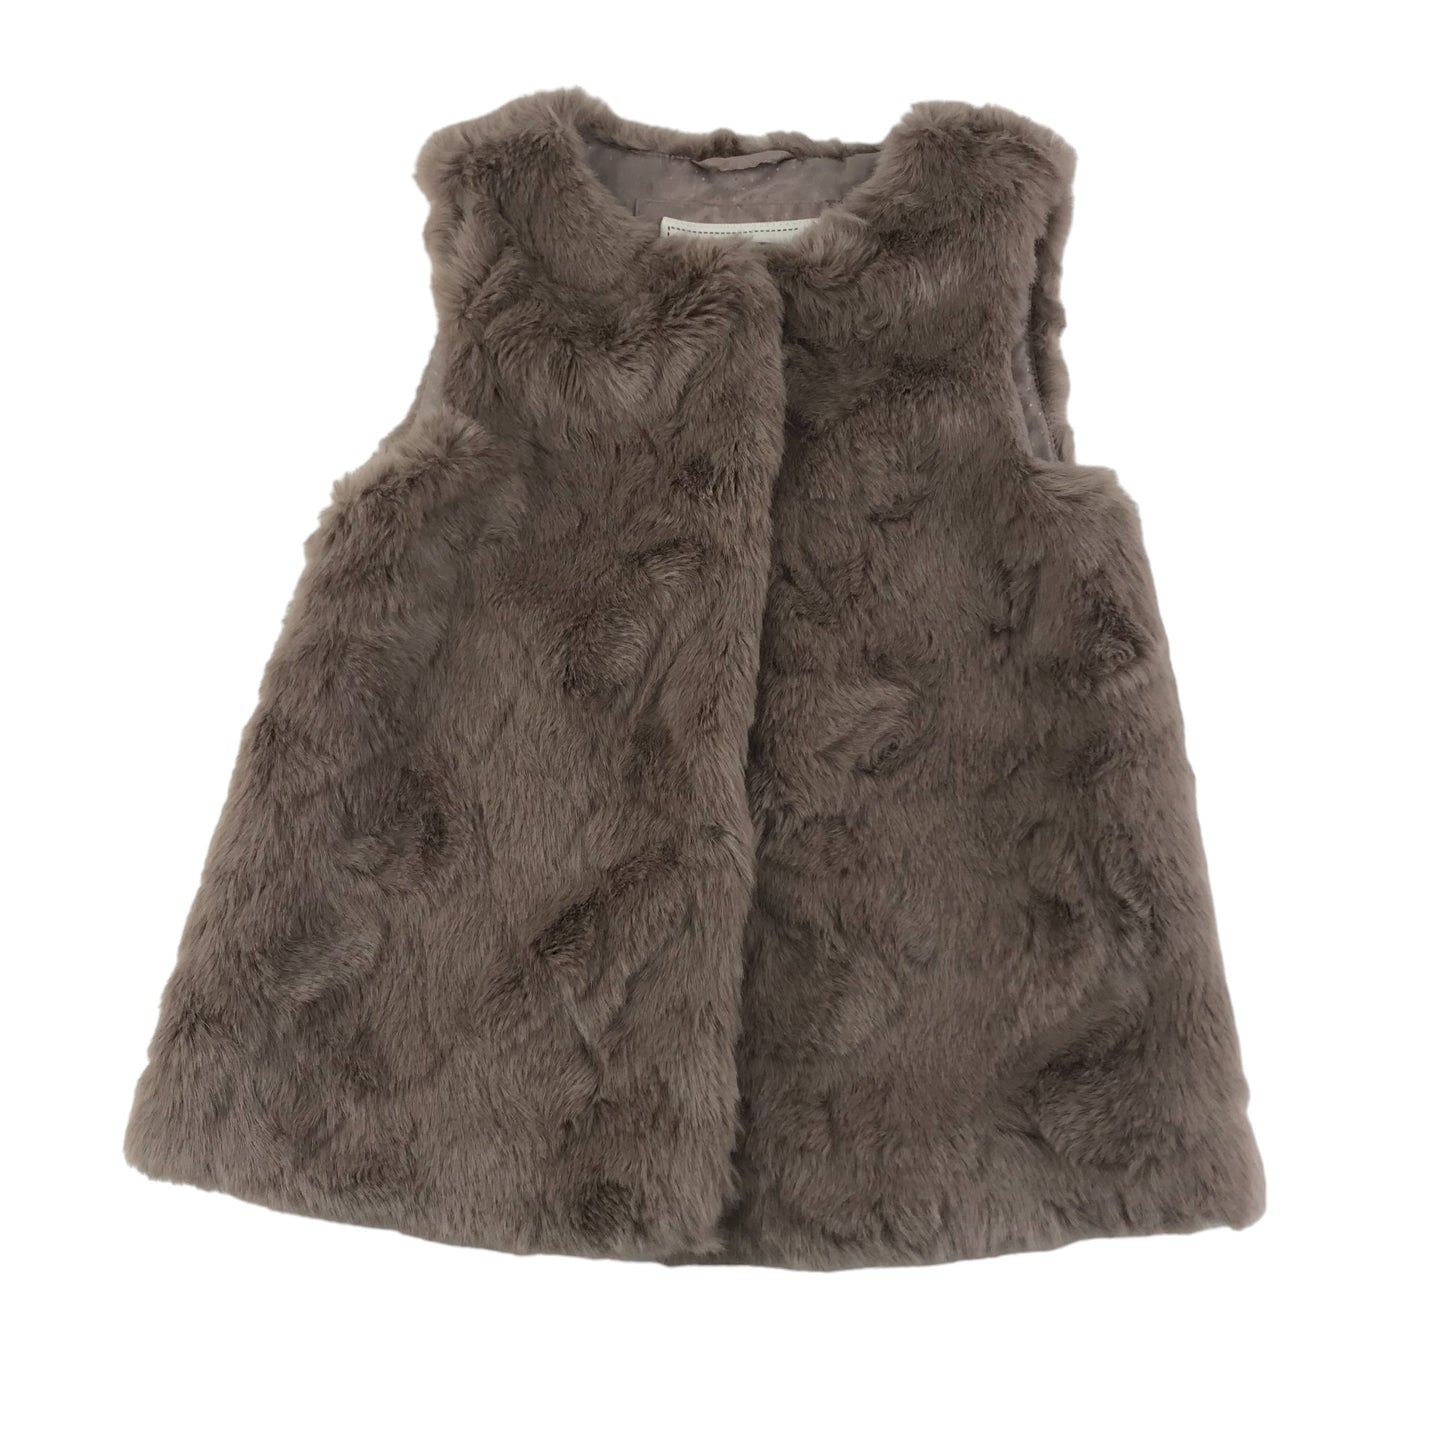 M&S Faux Fur Gilet Age 6 Brown Soft Fluffy Sleeveless